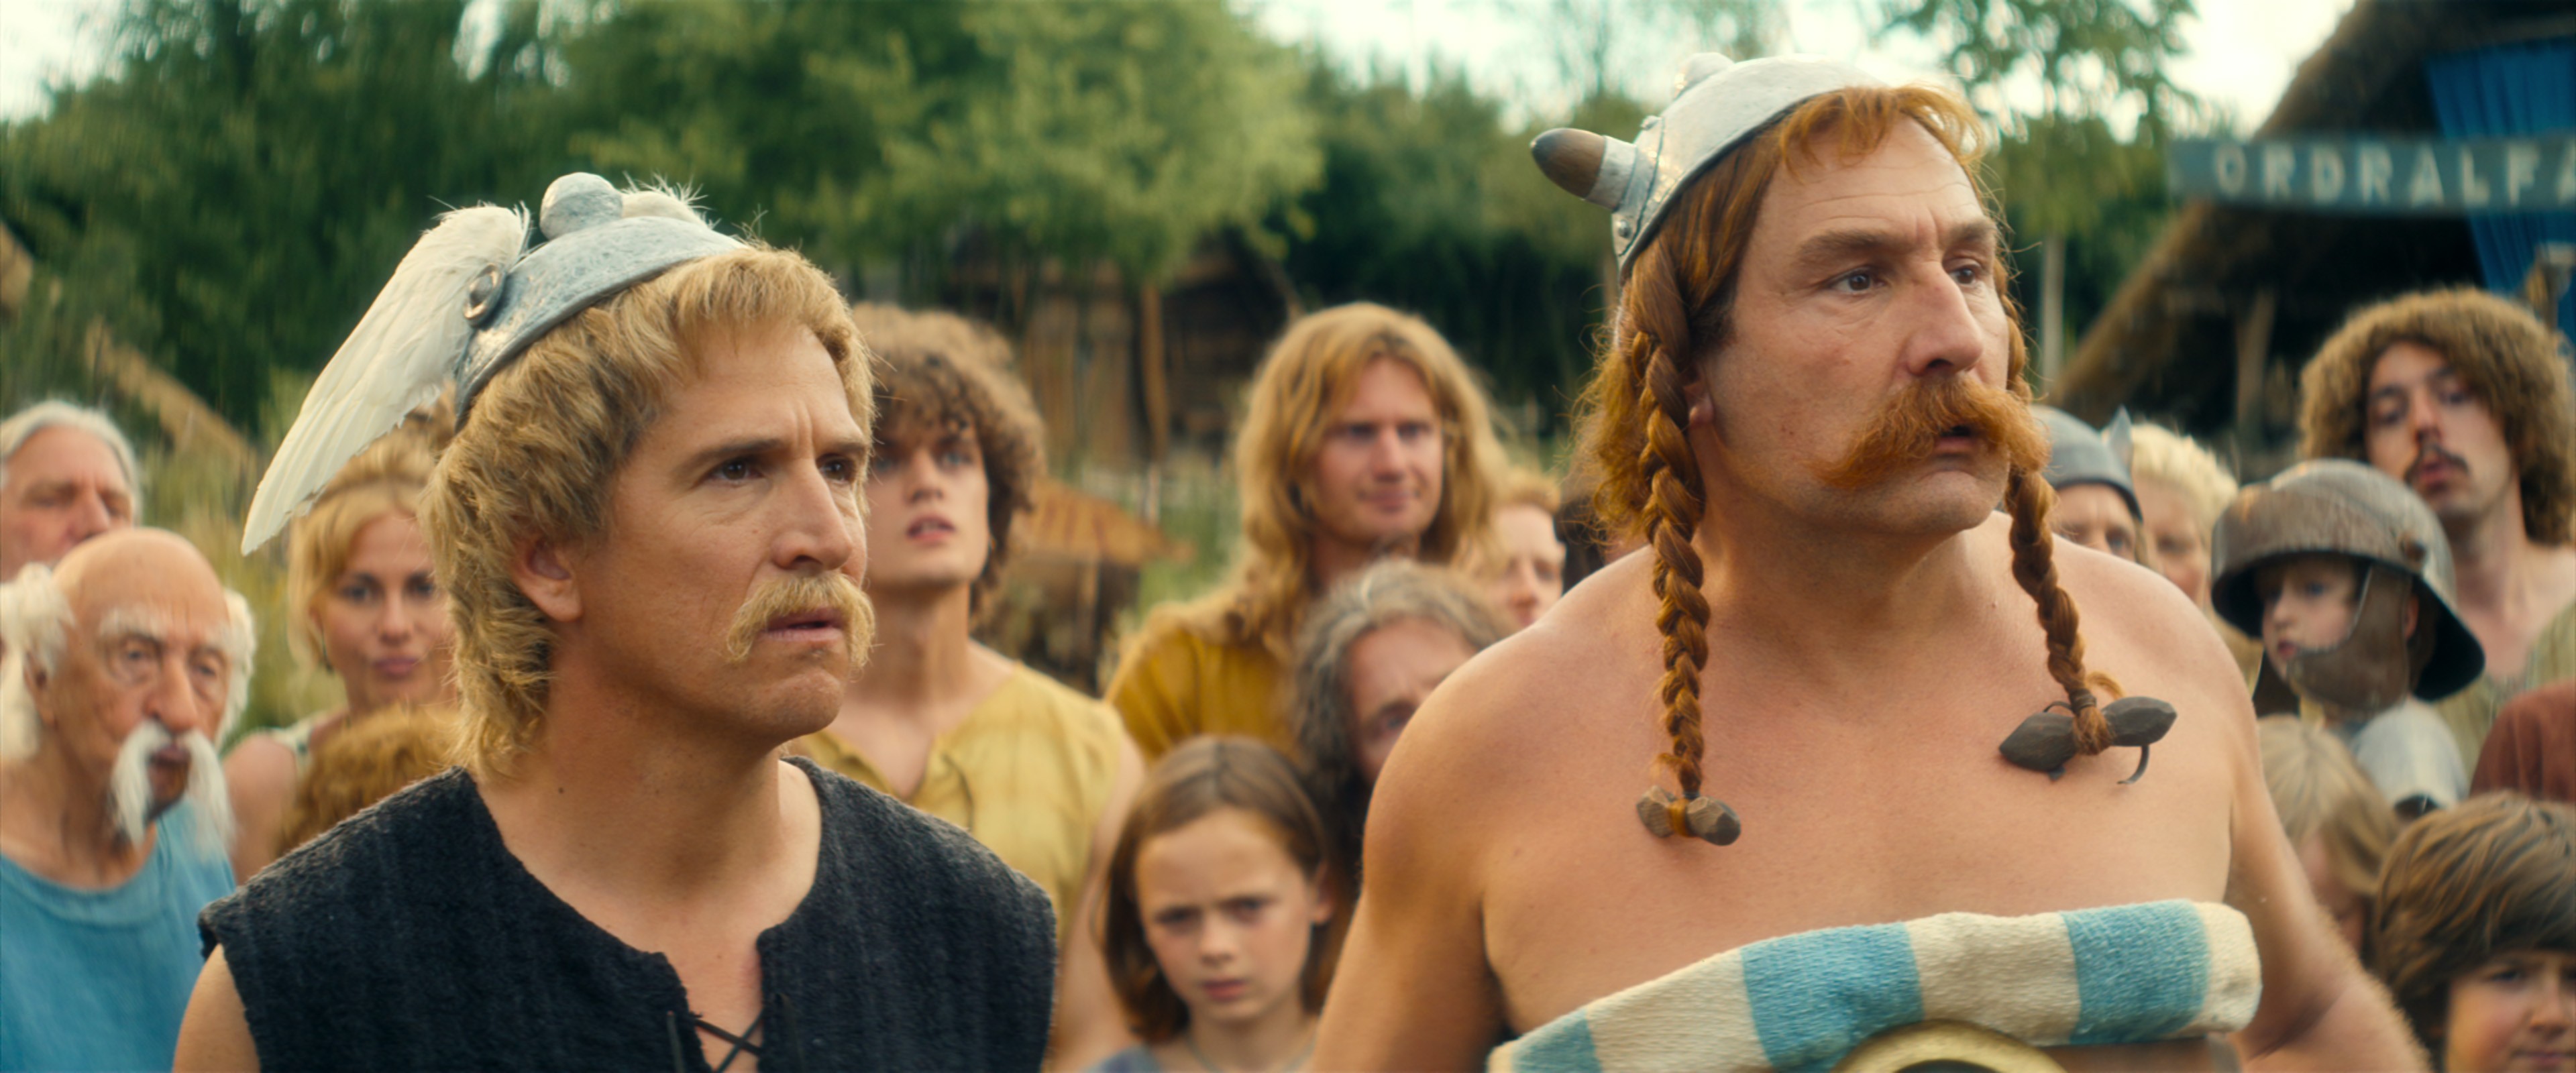 Tonight on TV: Asterix and Obelix, The Middle Kingdom, by and starring  Guillaume Canet - Our verdict 